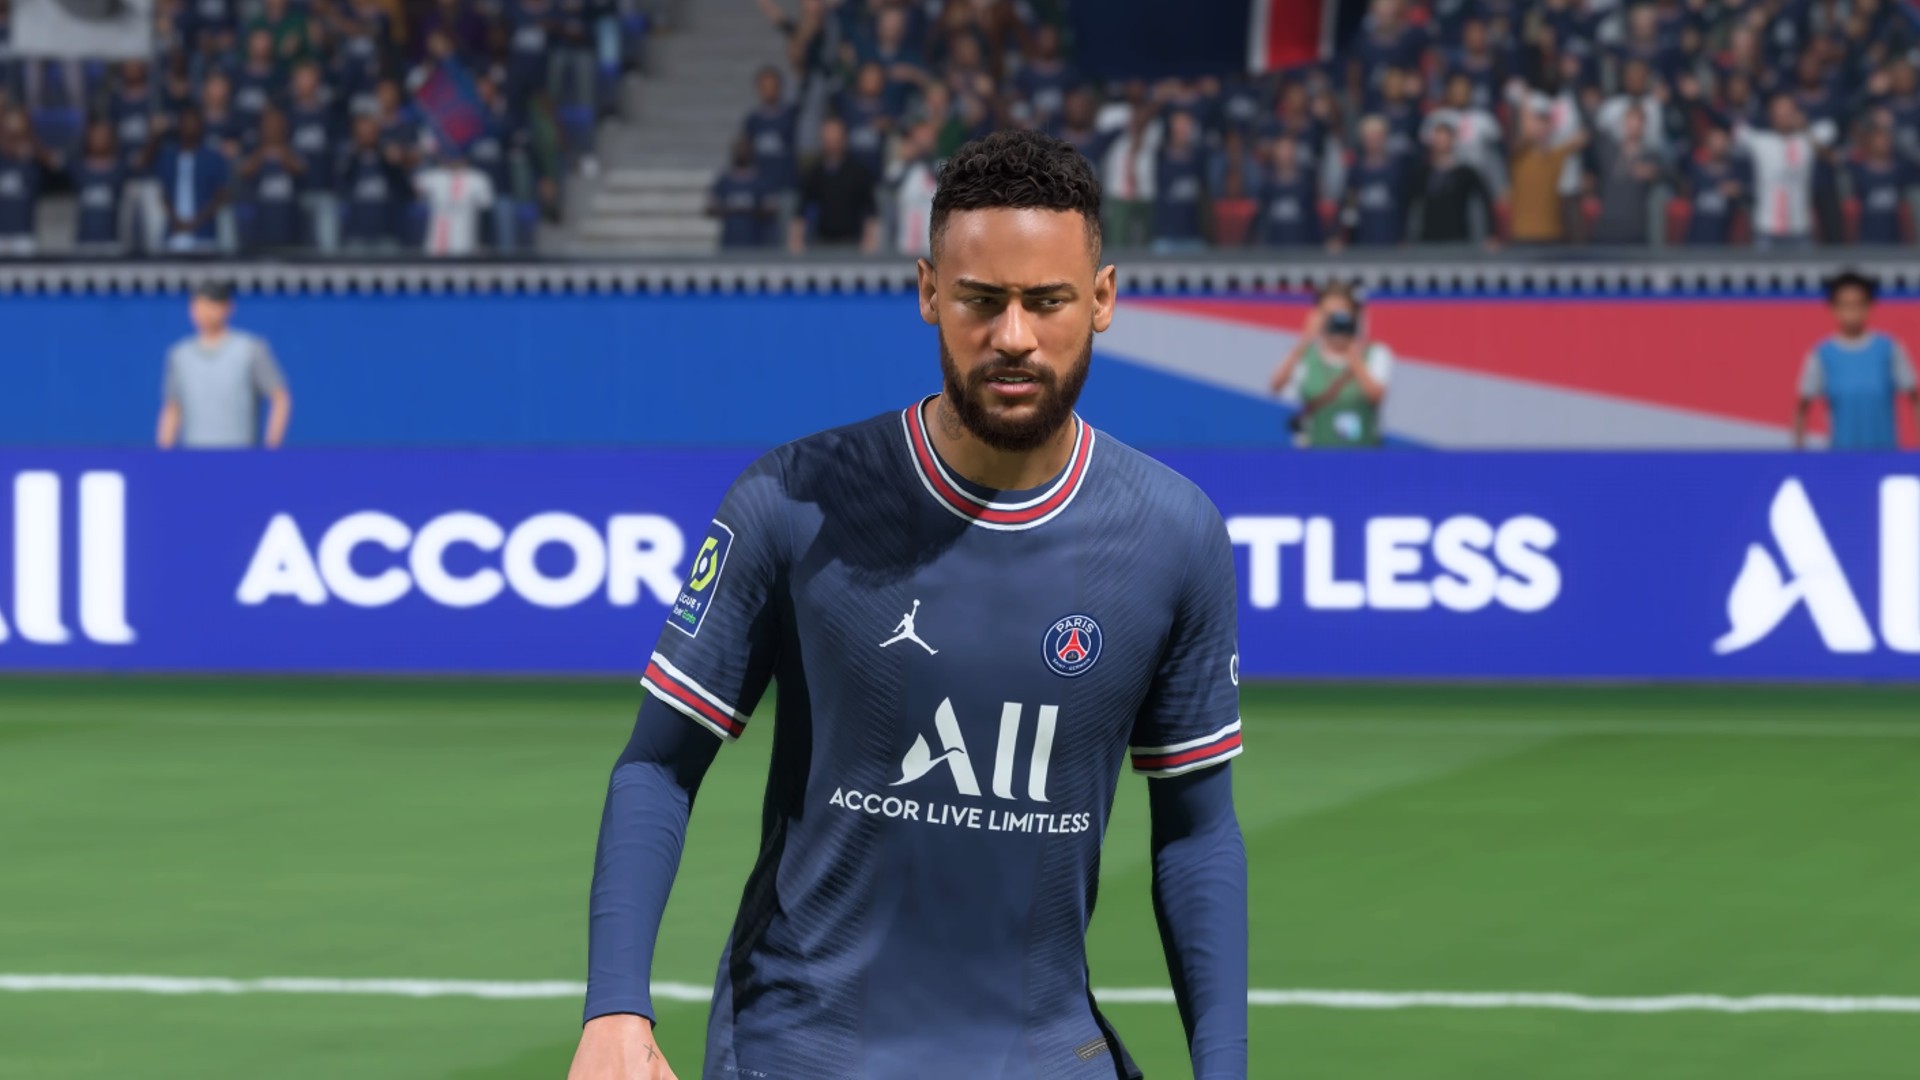 FIFA 23 5 star skillers guide – all the top players for FUT